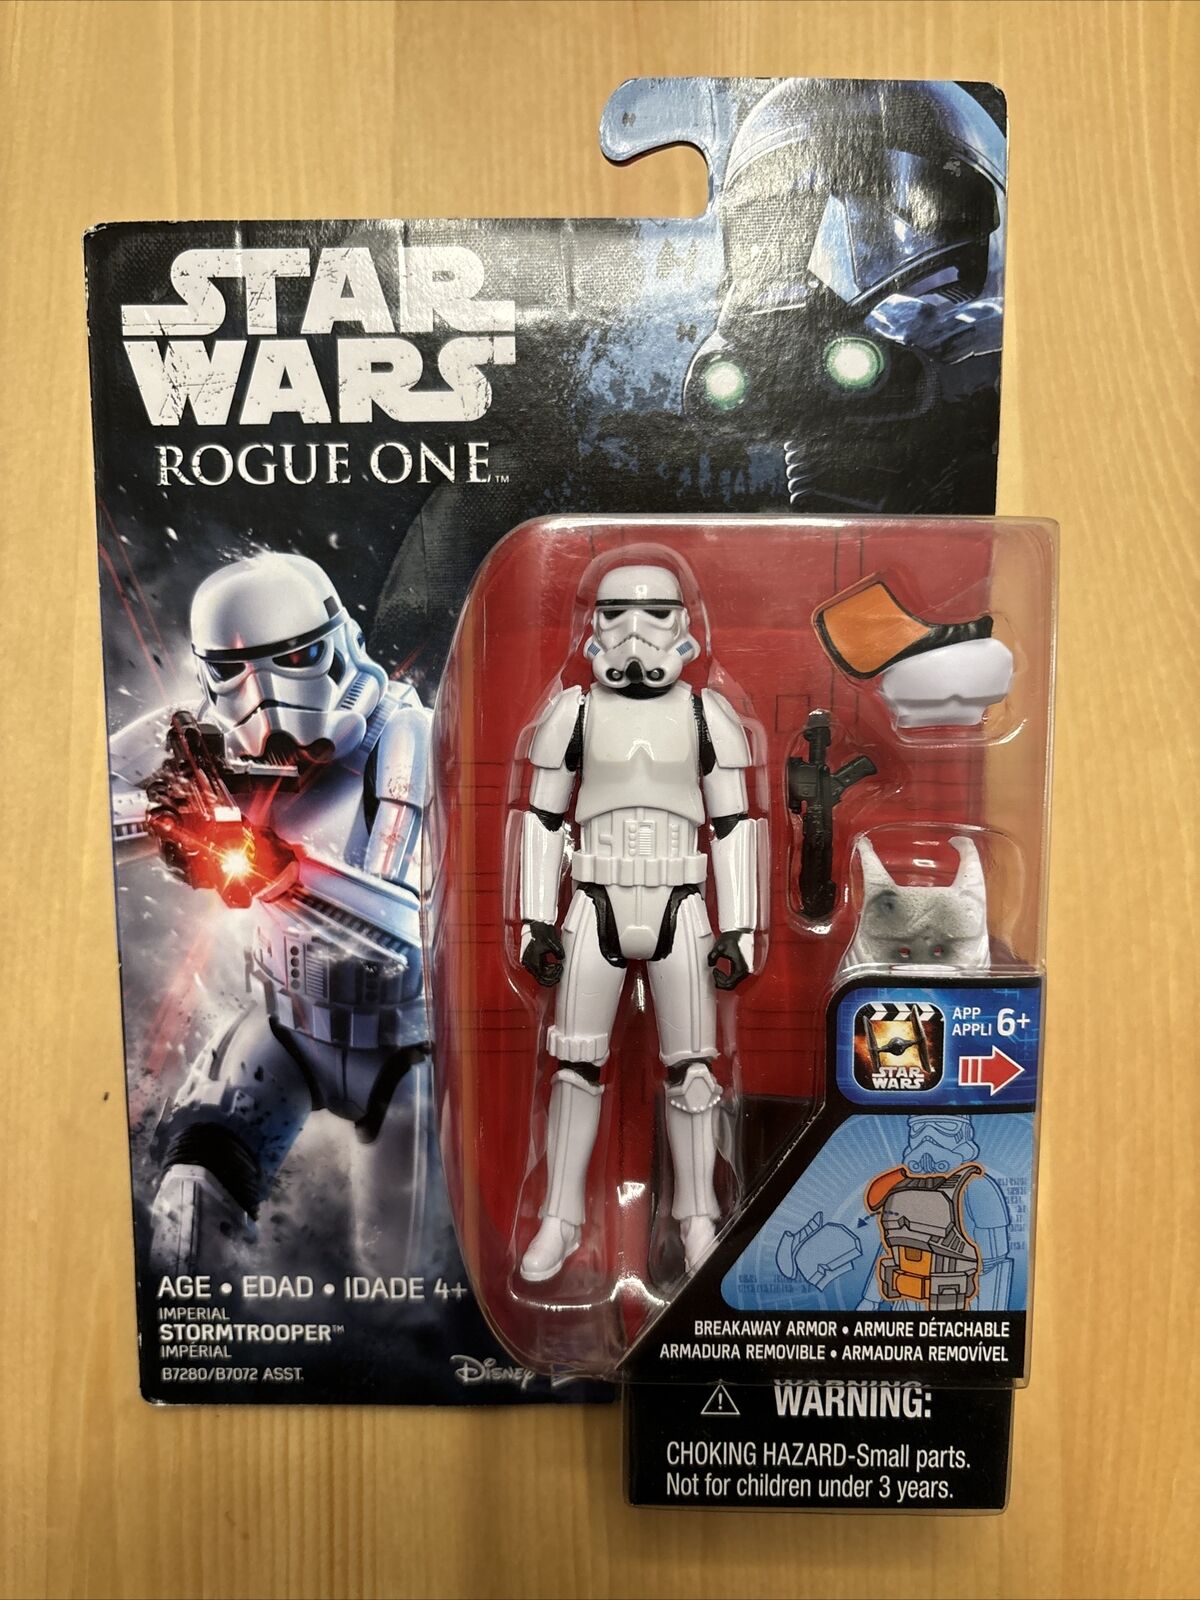 Star Wars Rogue One Imperial Stormtrooper 3.75" Action Figure Hasbro 2016 New